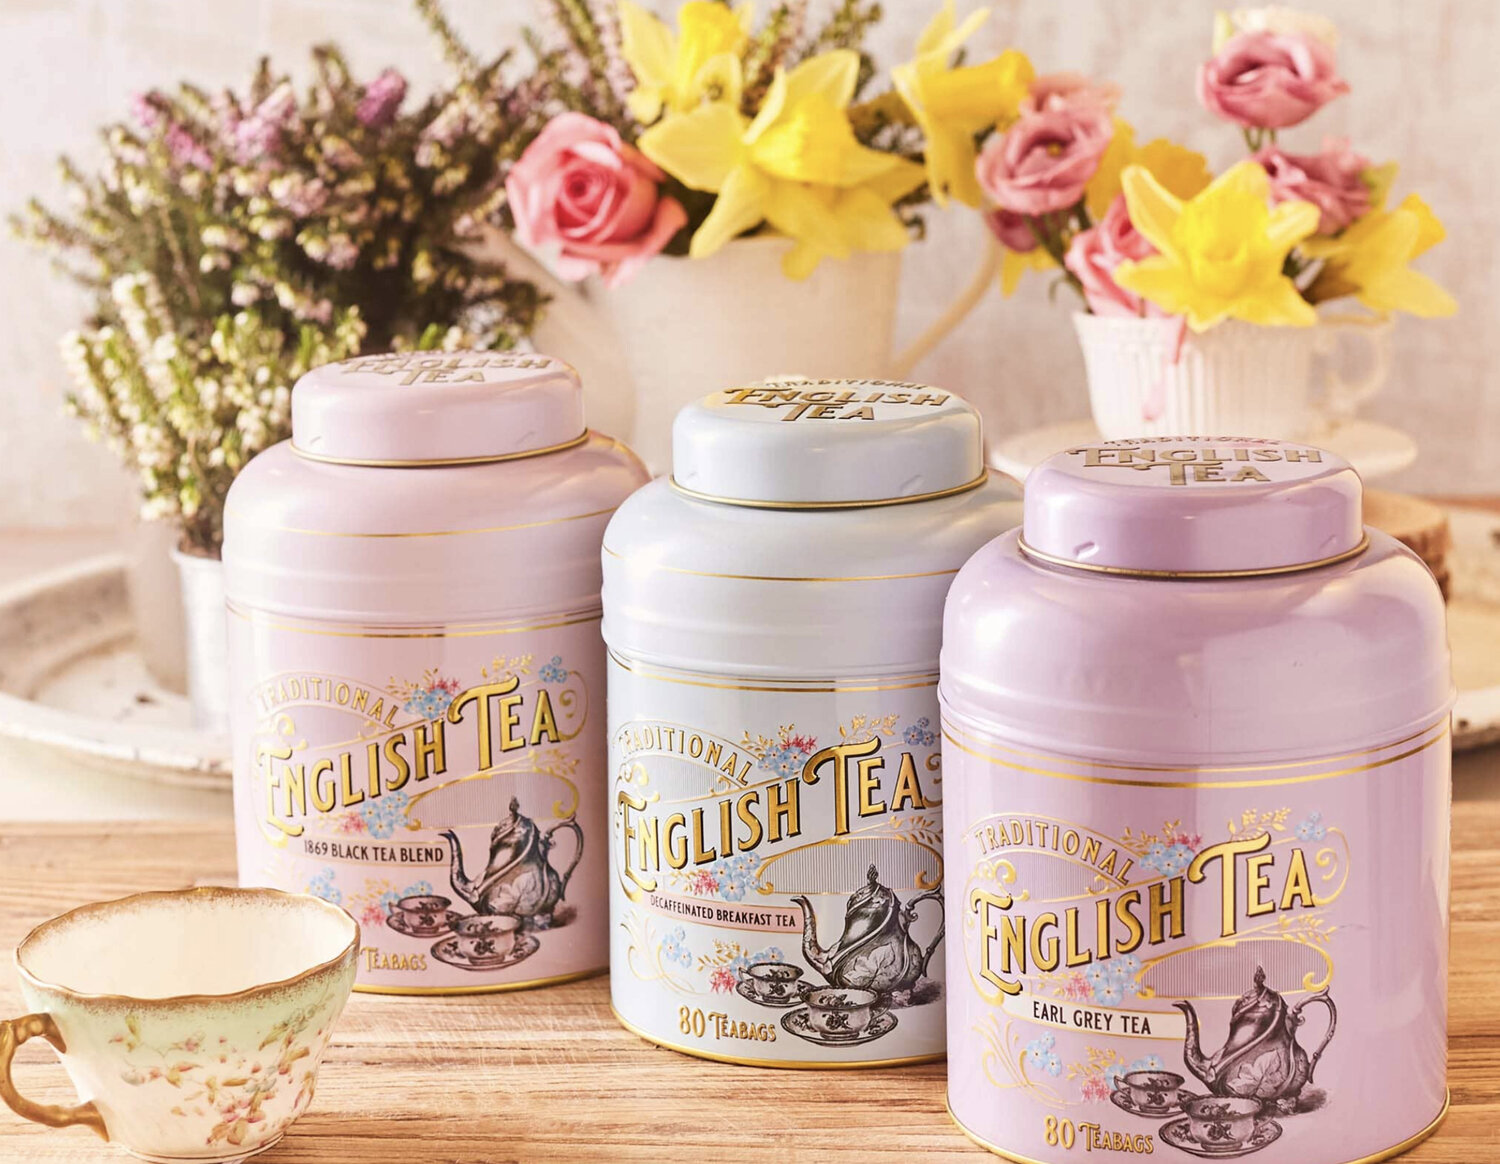 Spoil Mum with a delicious cuppa from  New English Tea, & a beautiful caddy to admire all year round